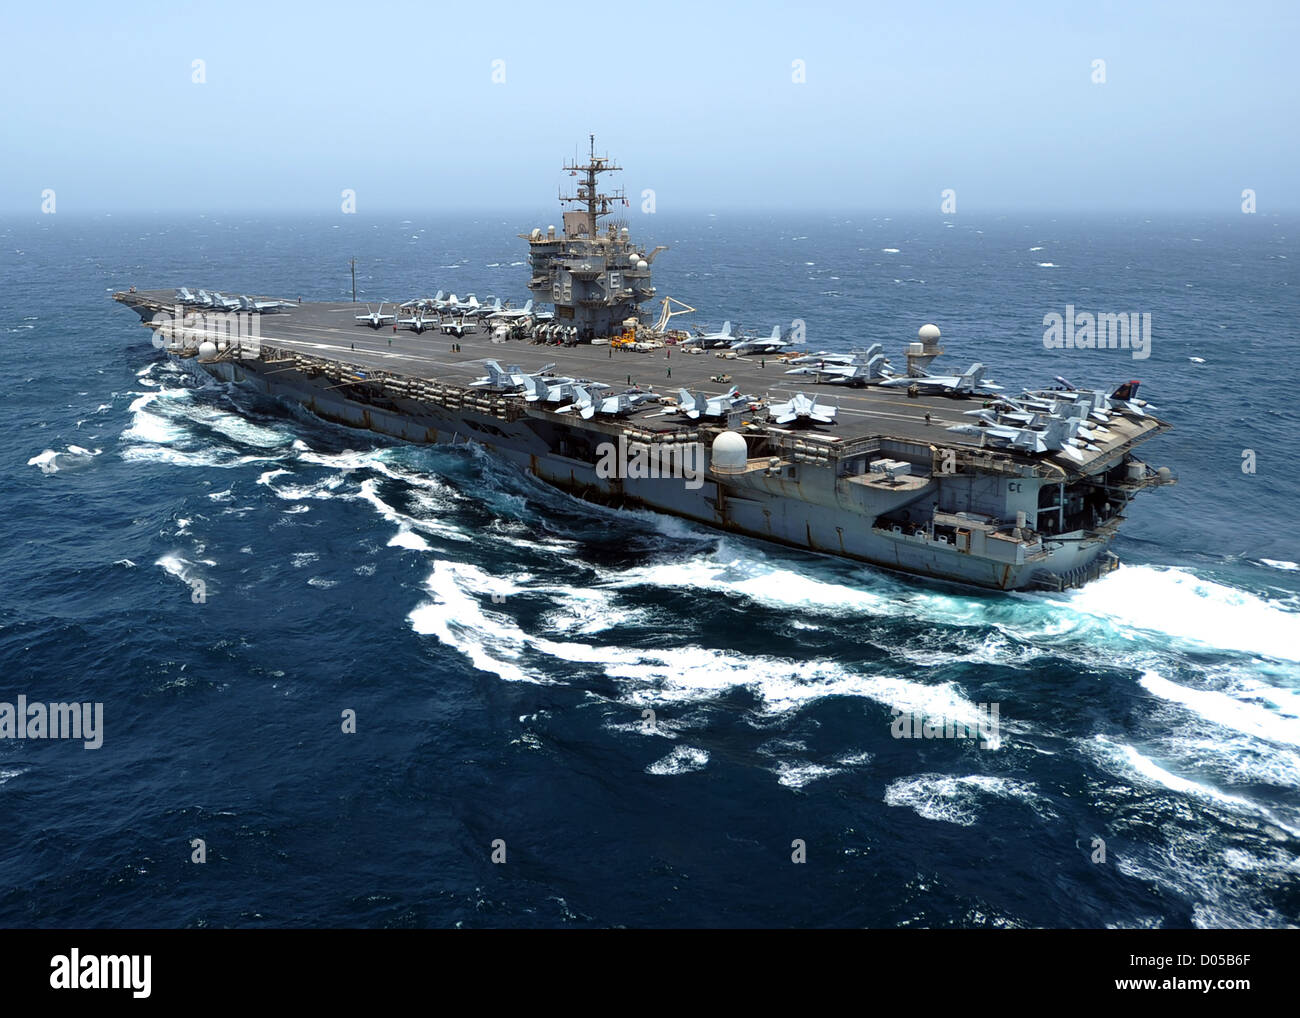 The aircraft carrier USS Enterprise transits the Arabian Sea August 2, 2012. Stock Photo